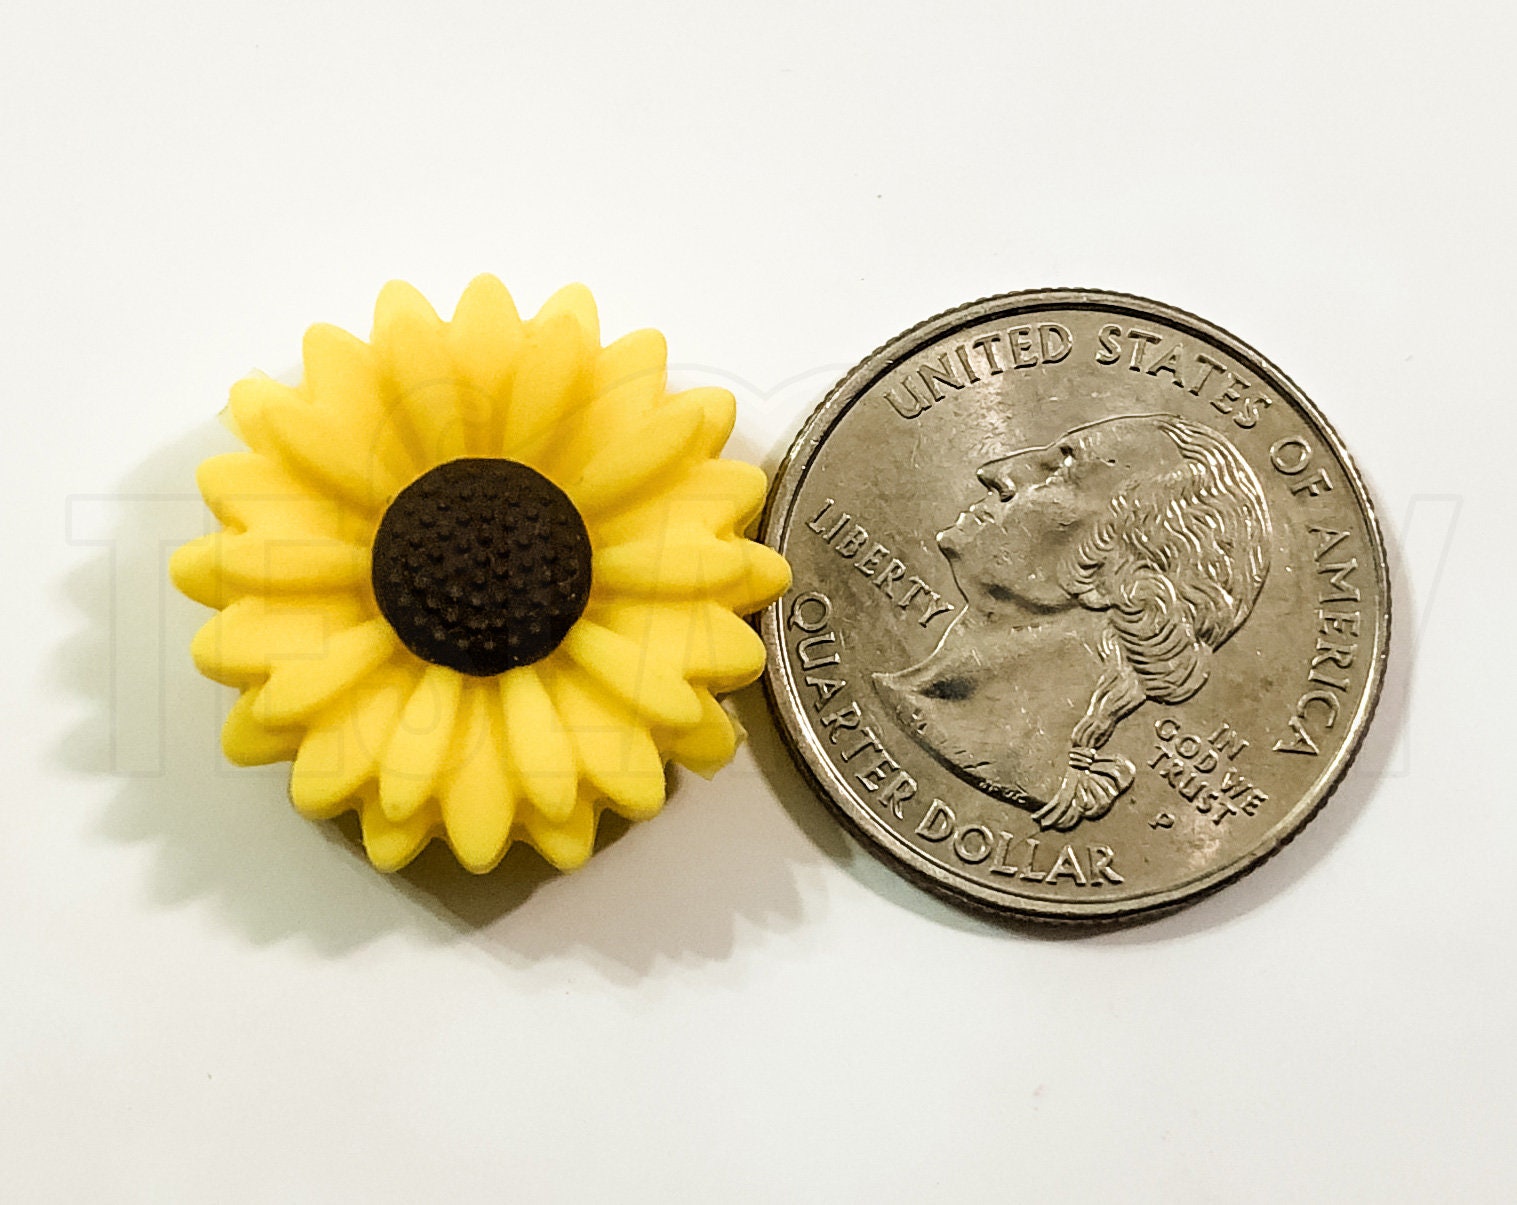 Silicone Brown Eyed Susan Beads (Yellow and Brown) - Bulk Silicone Beads Wholesale - DIY Jewelry